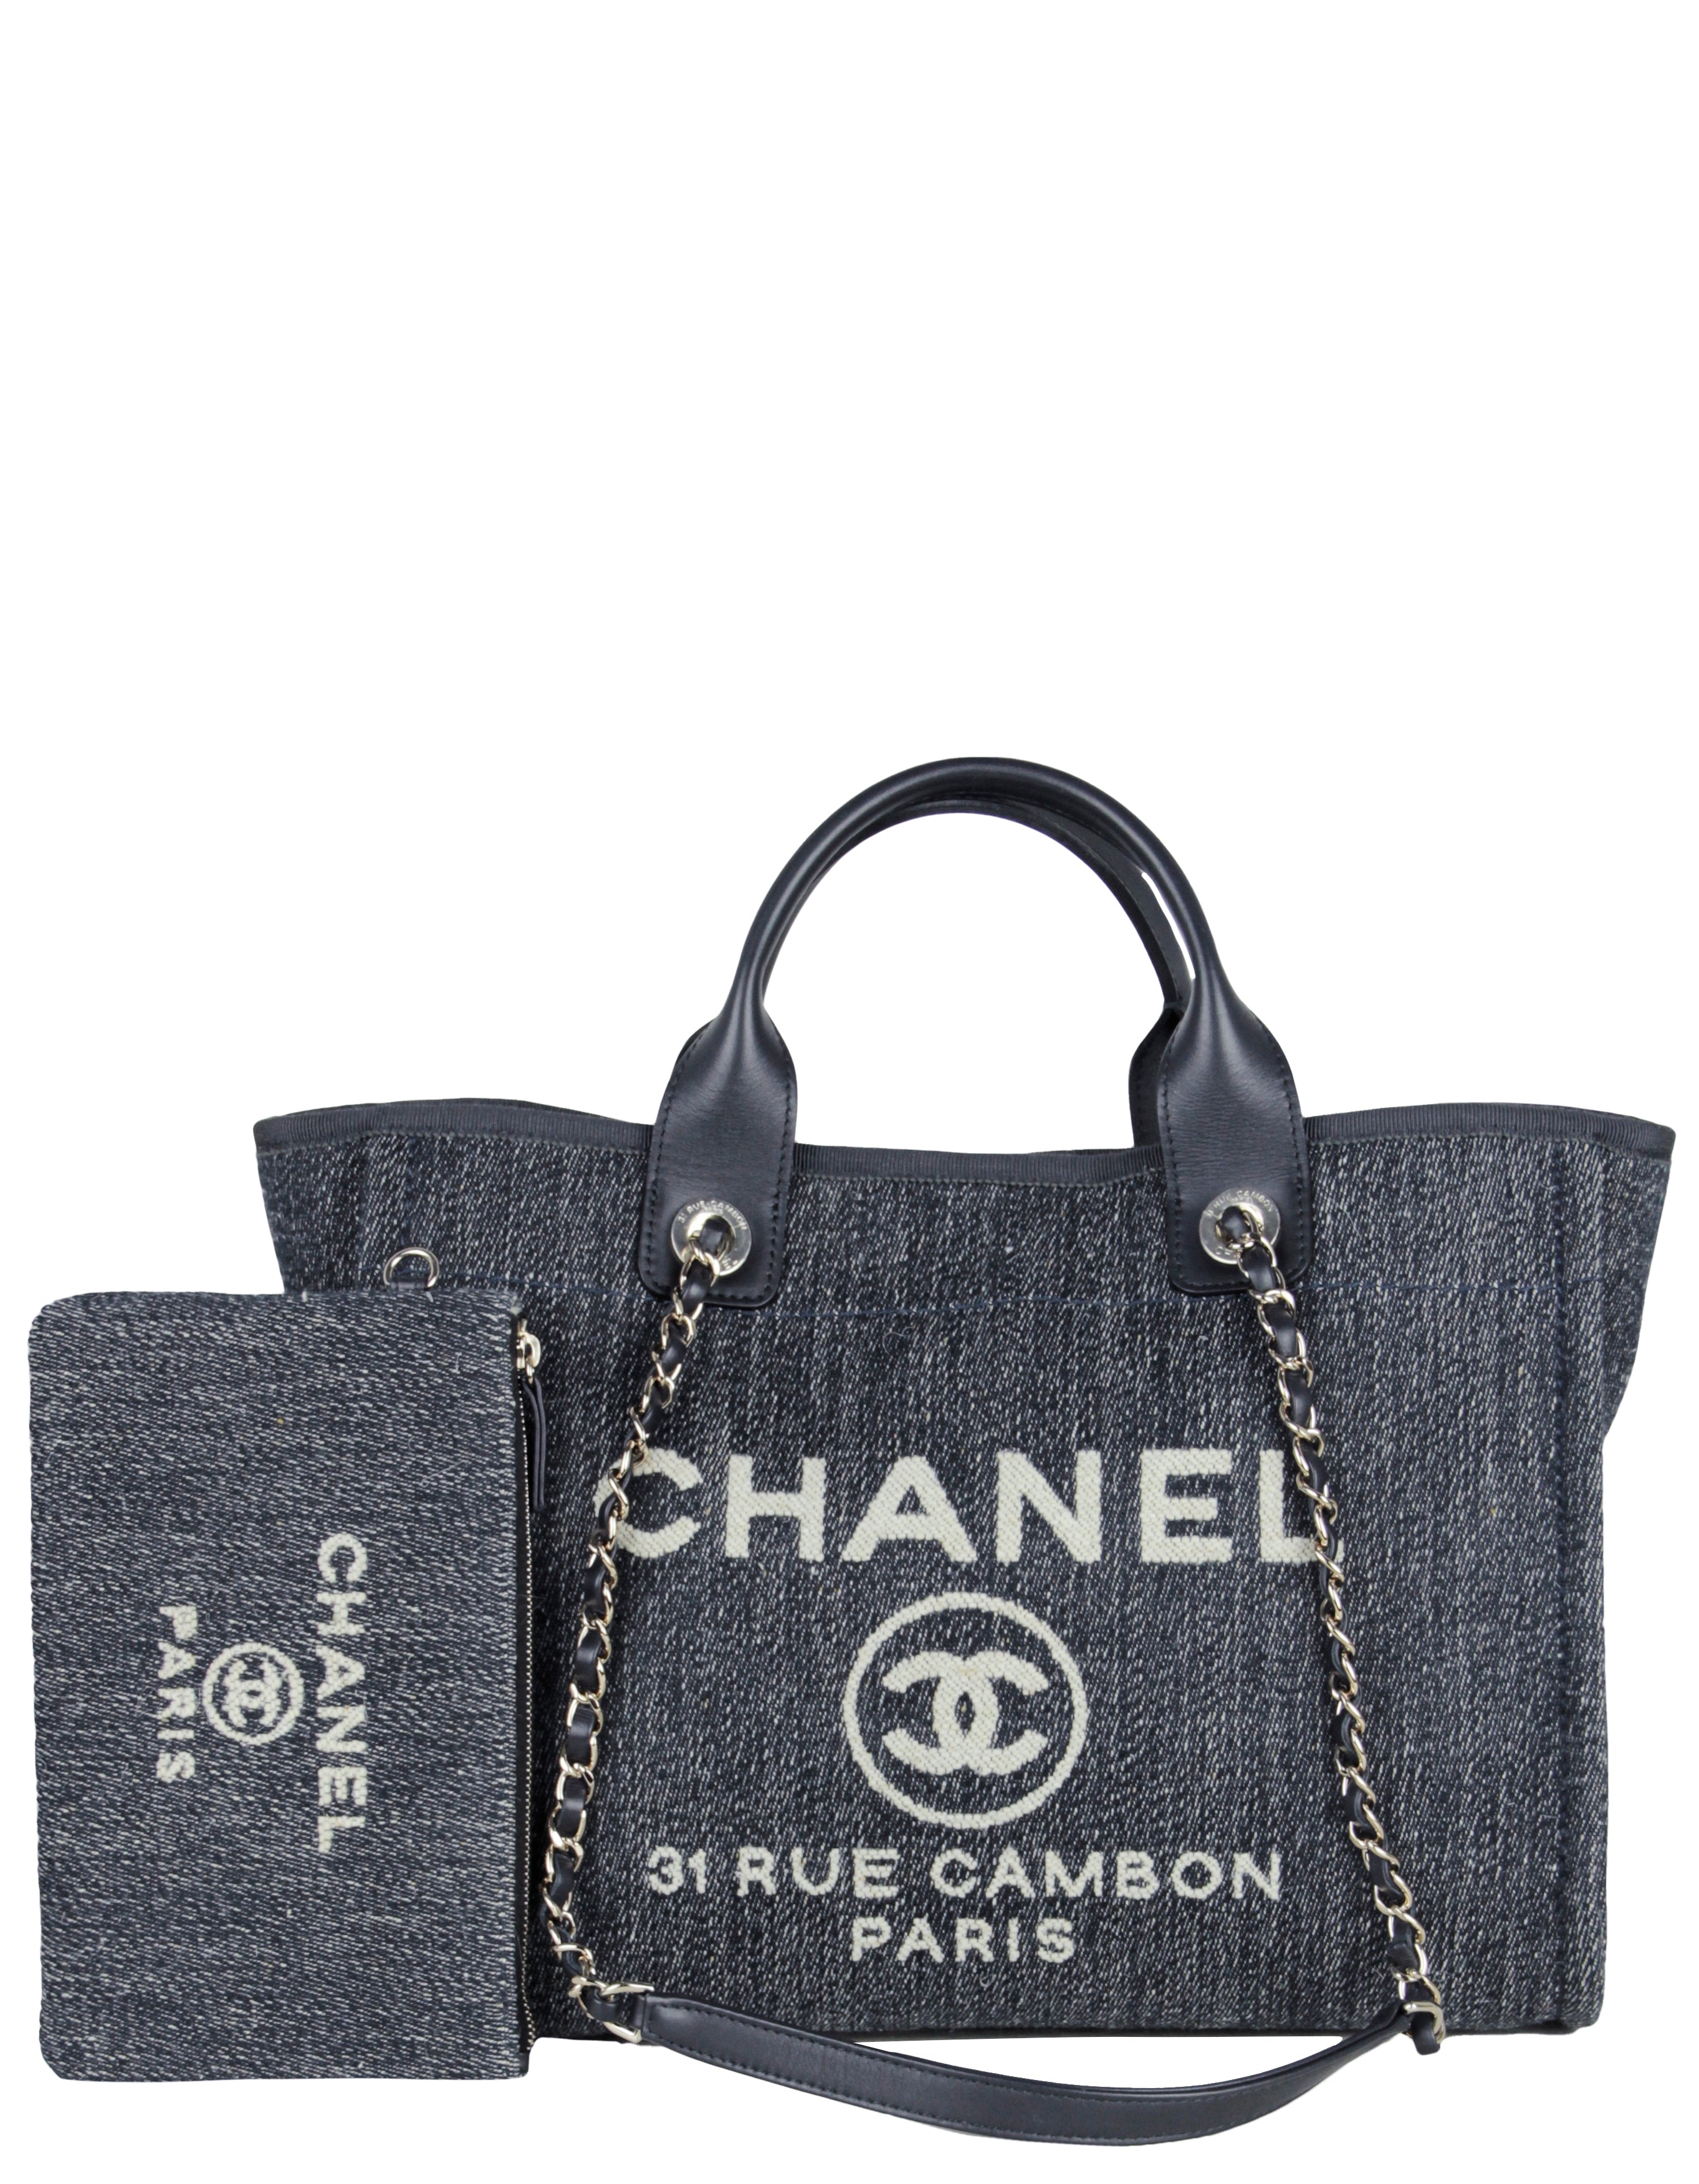 CHANEL Light Pink Canvas Deauville Medium Tote Bag - 30% Off